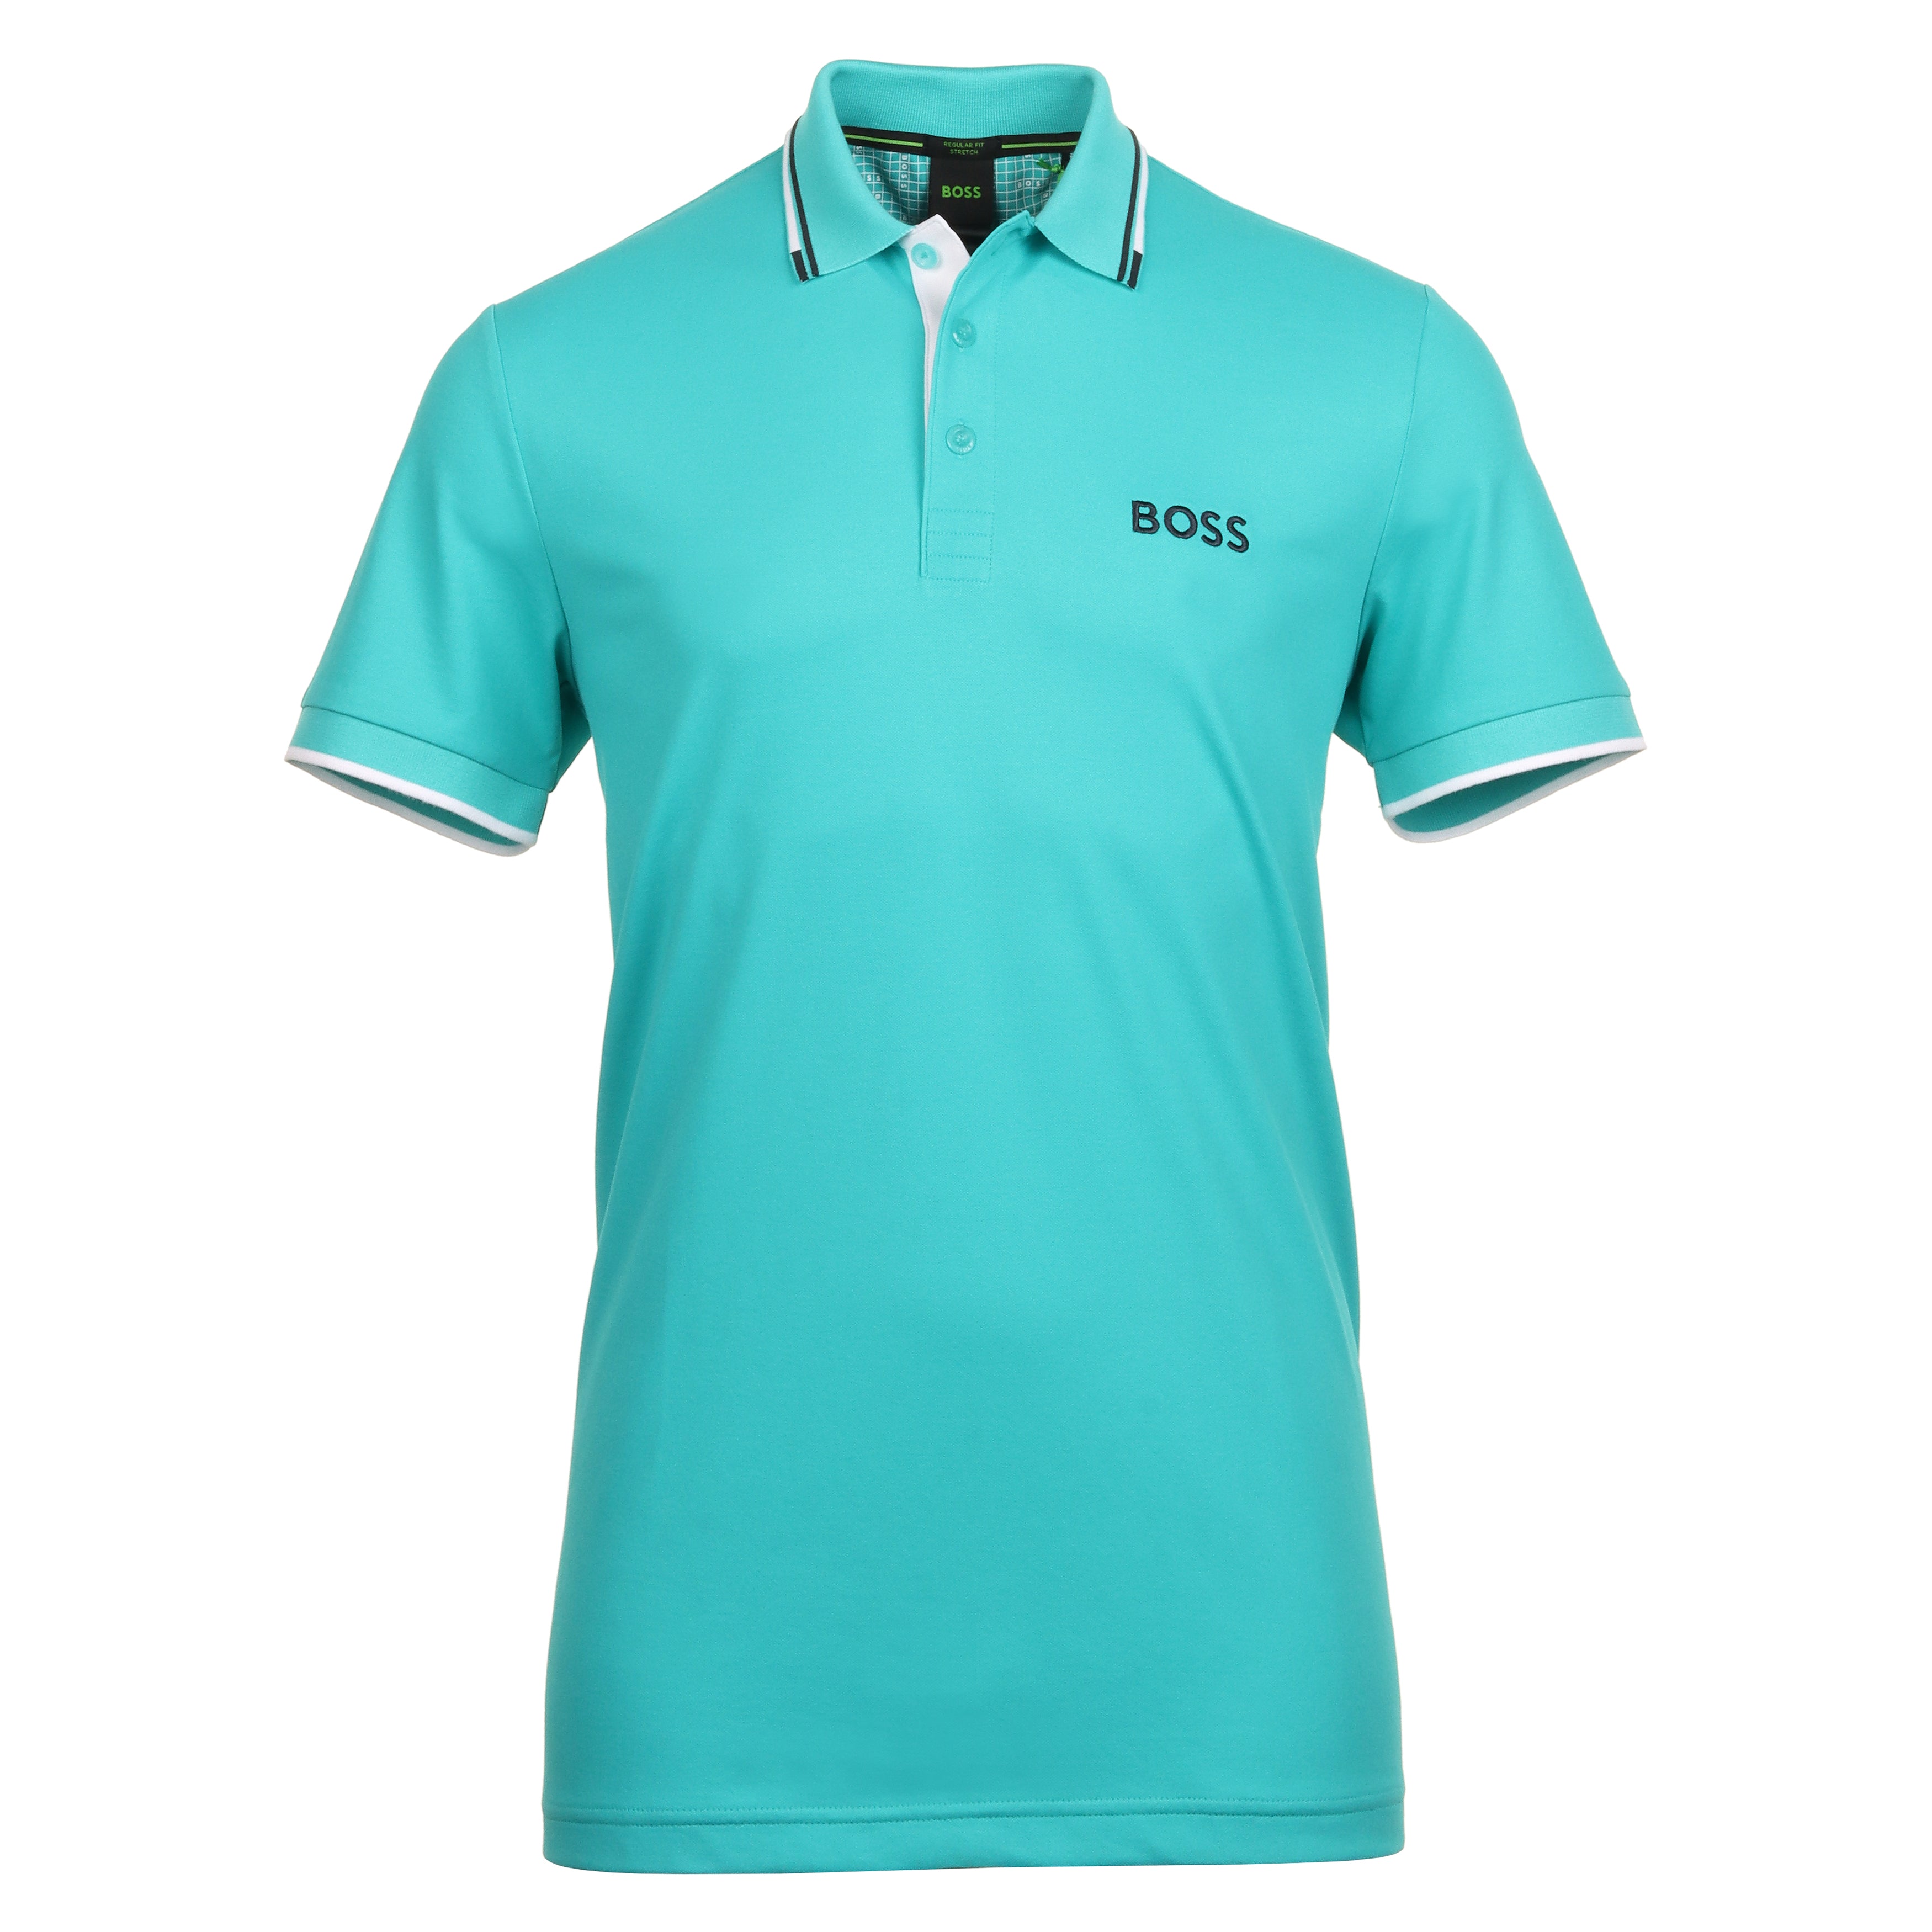 BOSS Paddy Pro Polo Shirt 50469102 Turquoise 367 | Function18